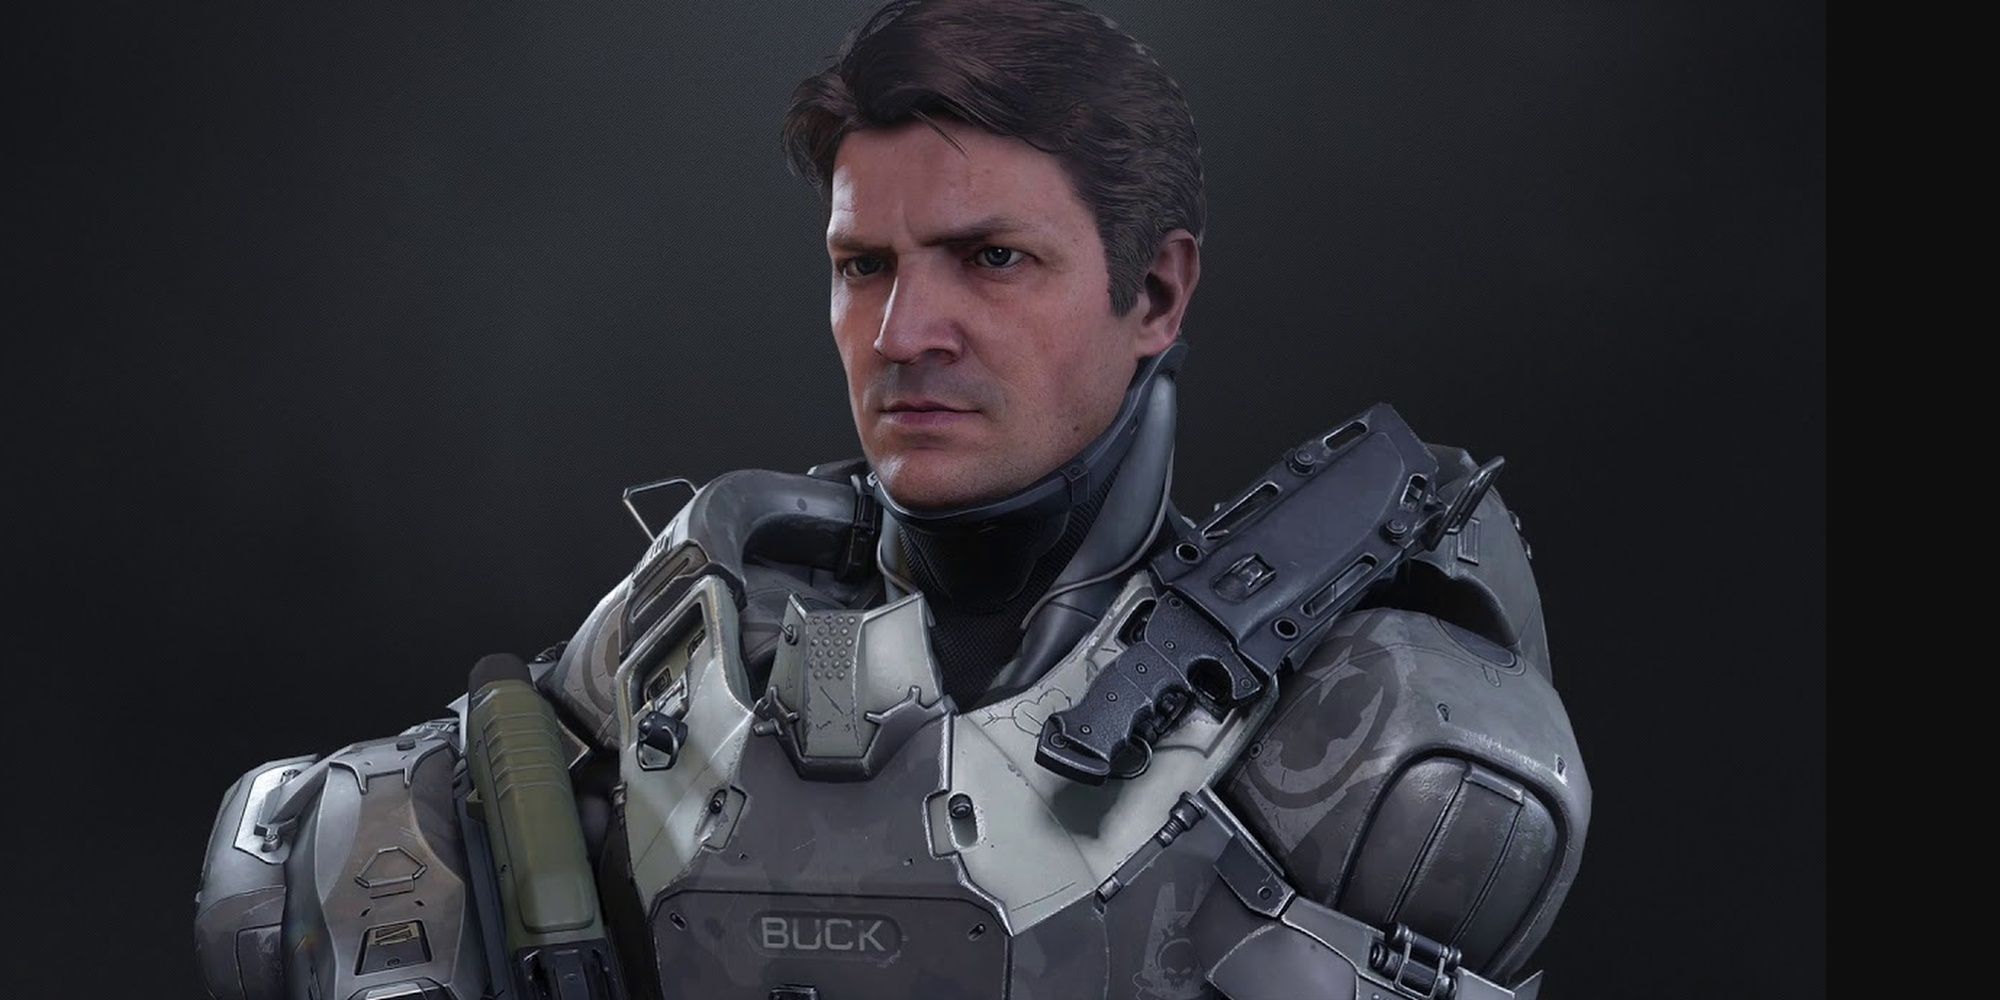 Halo: Nathan Fillion's Face Model On Halo Series Character Buck